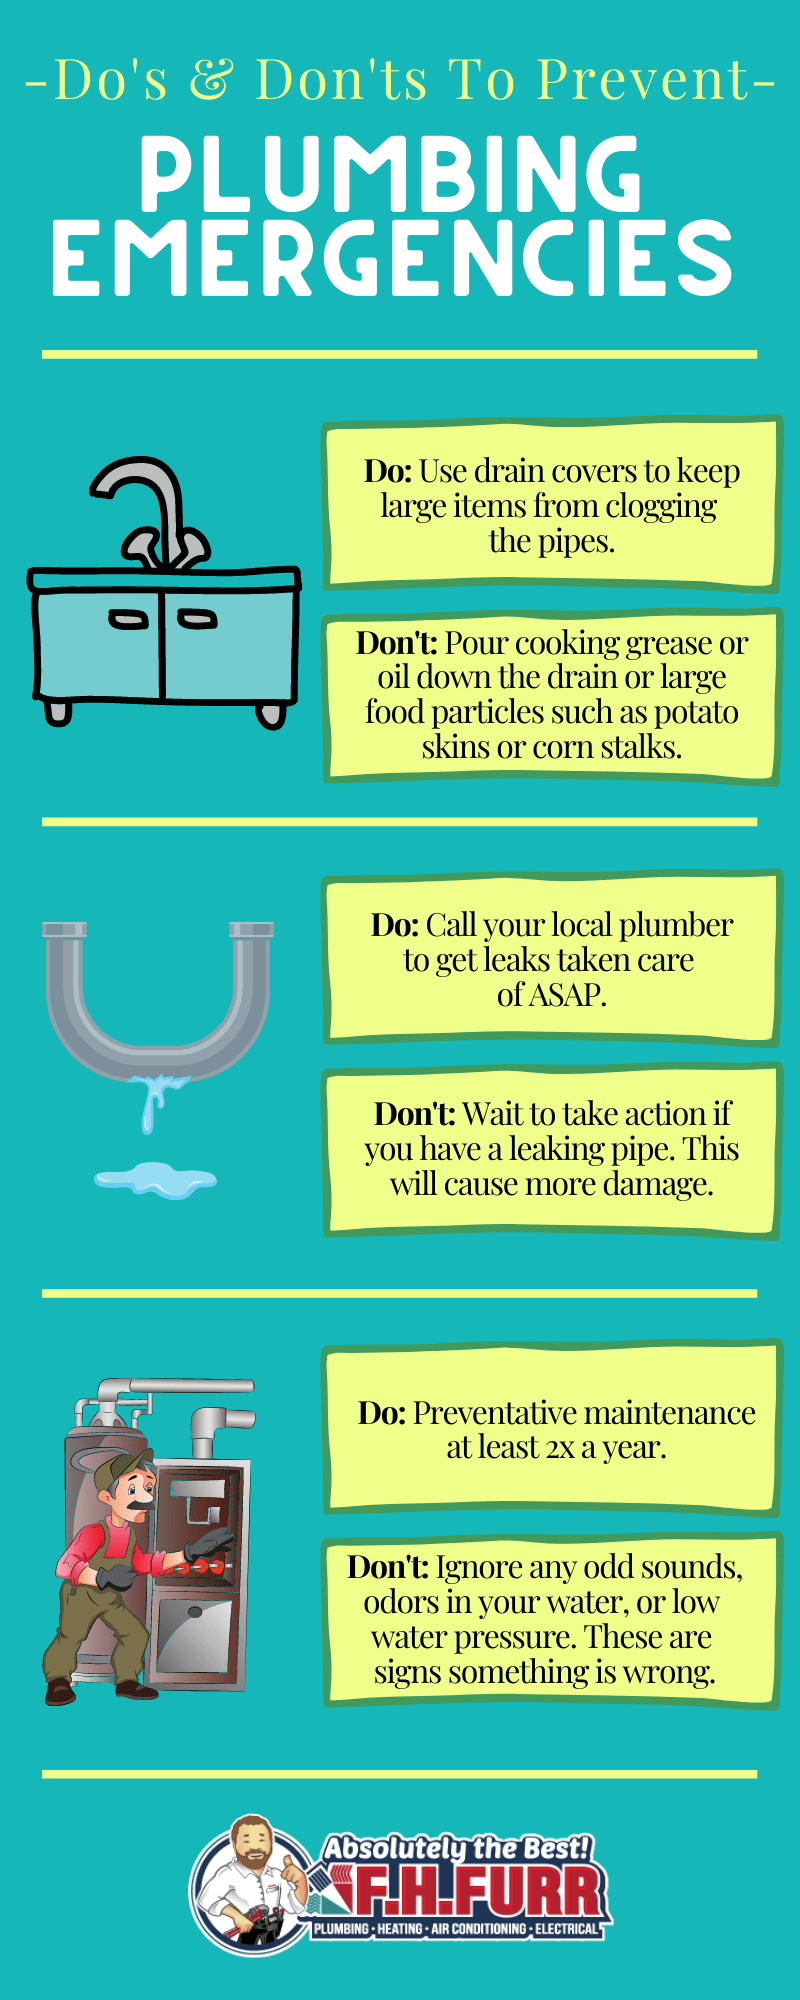 Infographic with do's and don'ts to prevent plumbing emergencies. F.H. Furr logo at bottom.